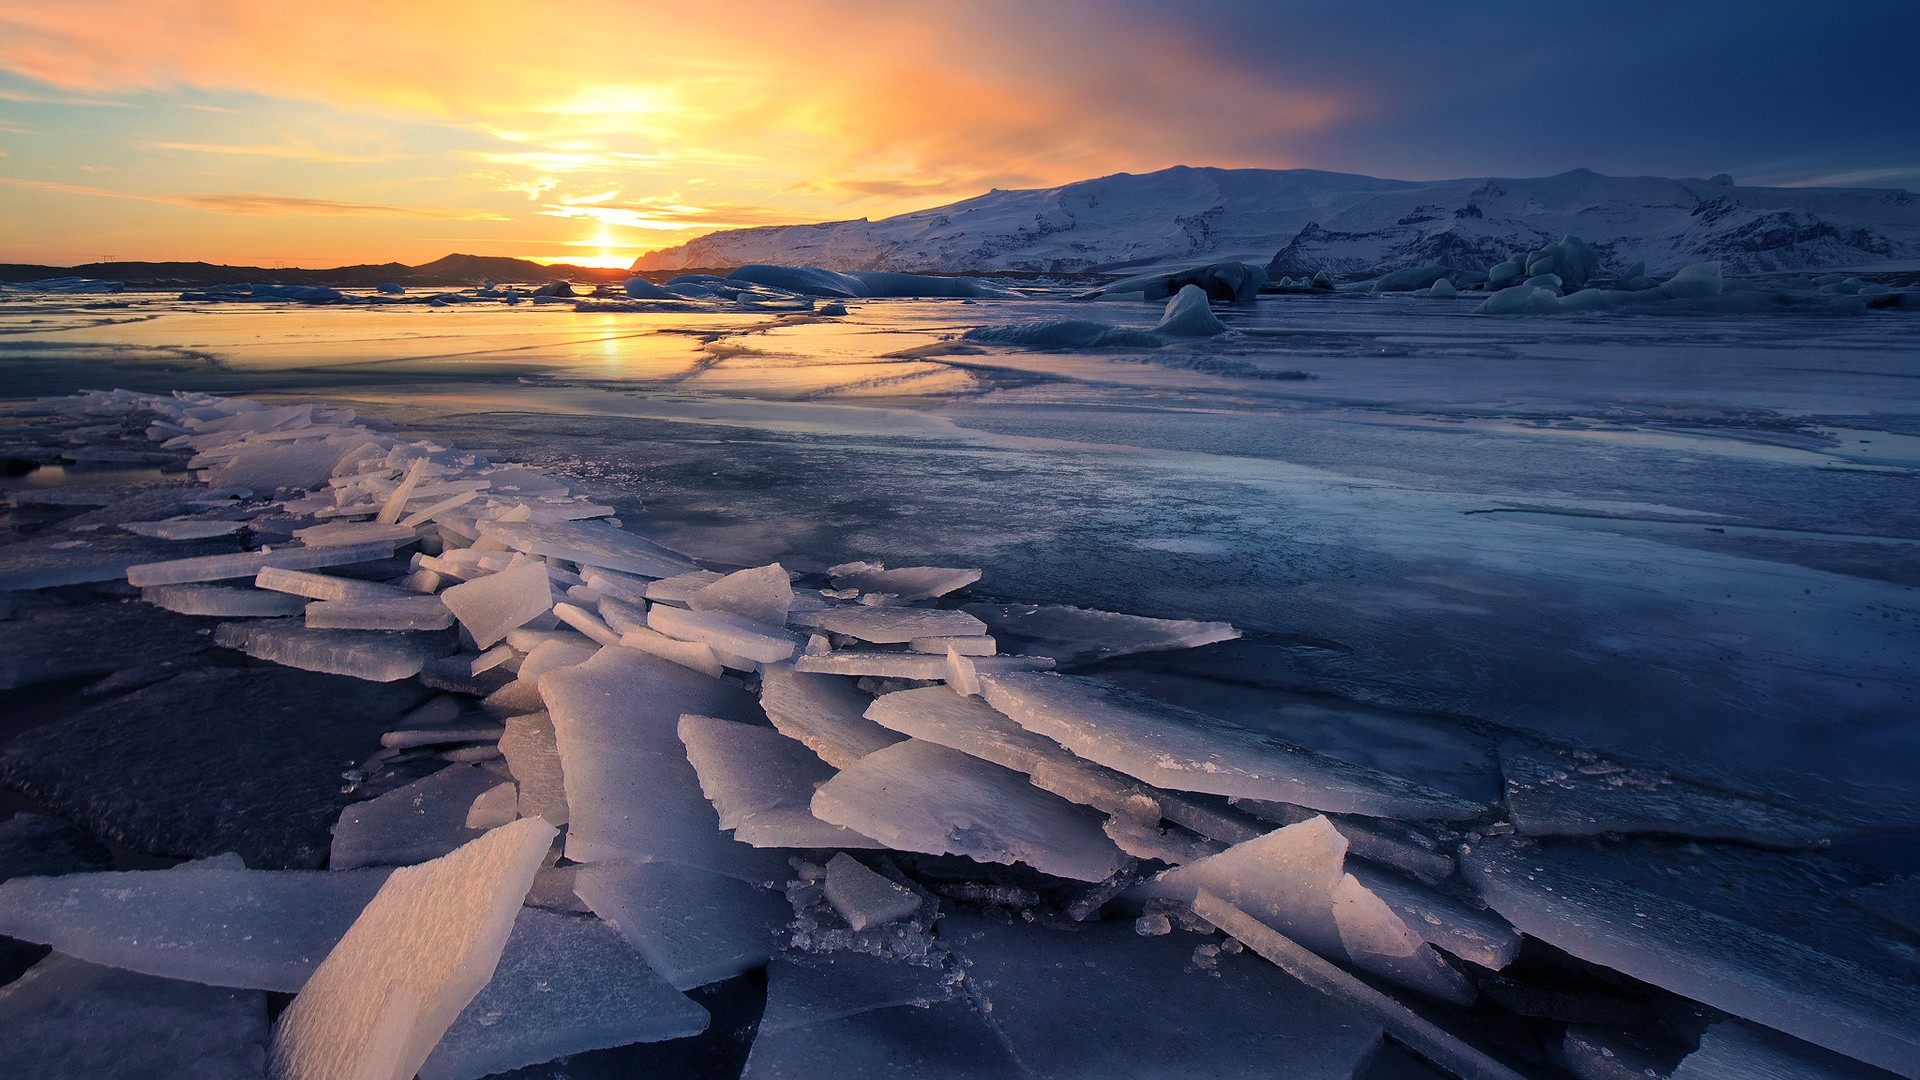 General 1920x1080 nature landscape Iceland ice winter snow glacier iceberg water mountains sunset clouds reflection frozen lake nordic landscapes